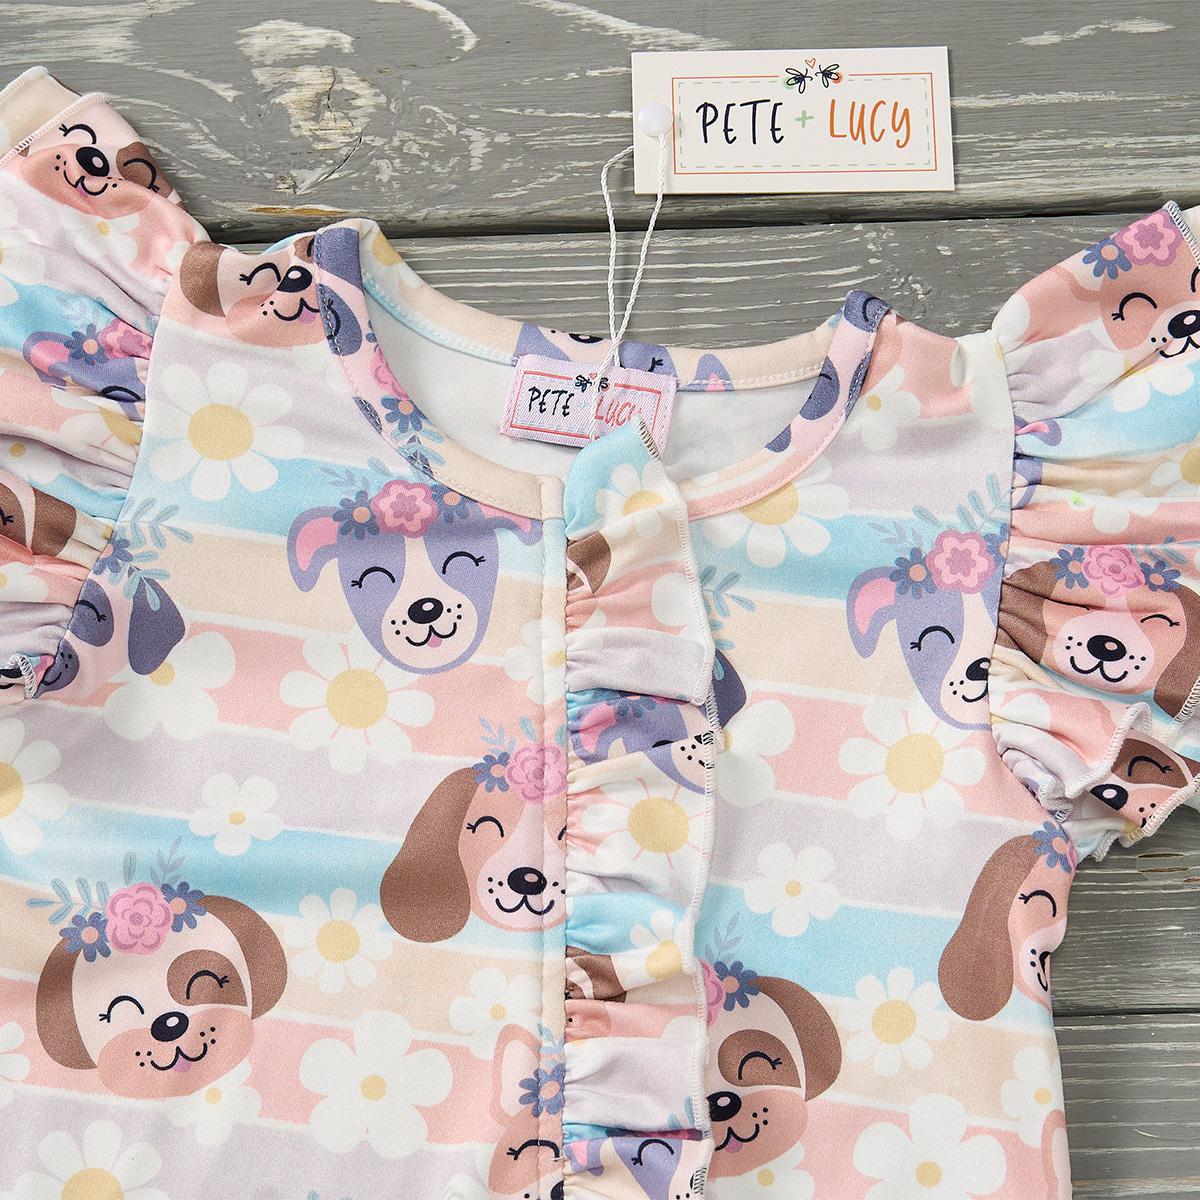 (Preorder) Puppy Blossoms Girl’s Infant Romper by Pete + Lucy